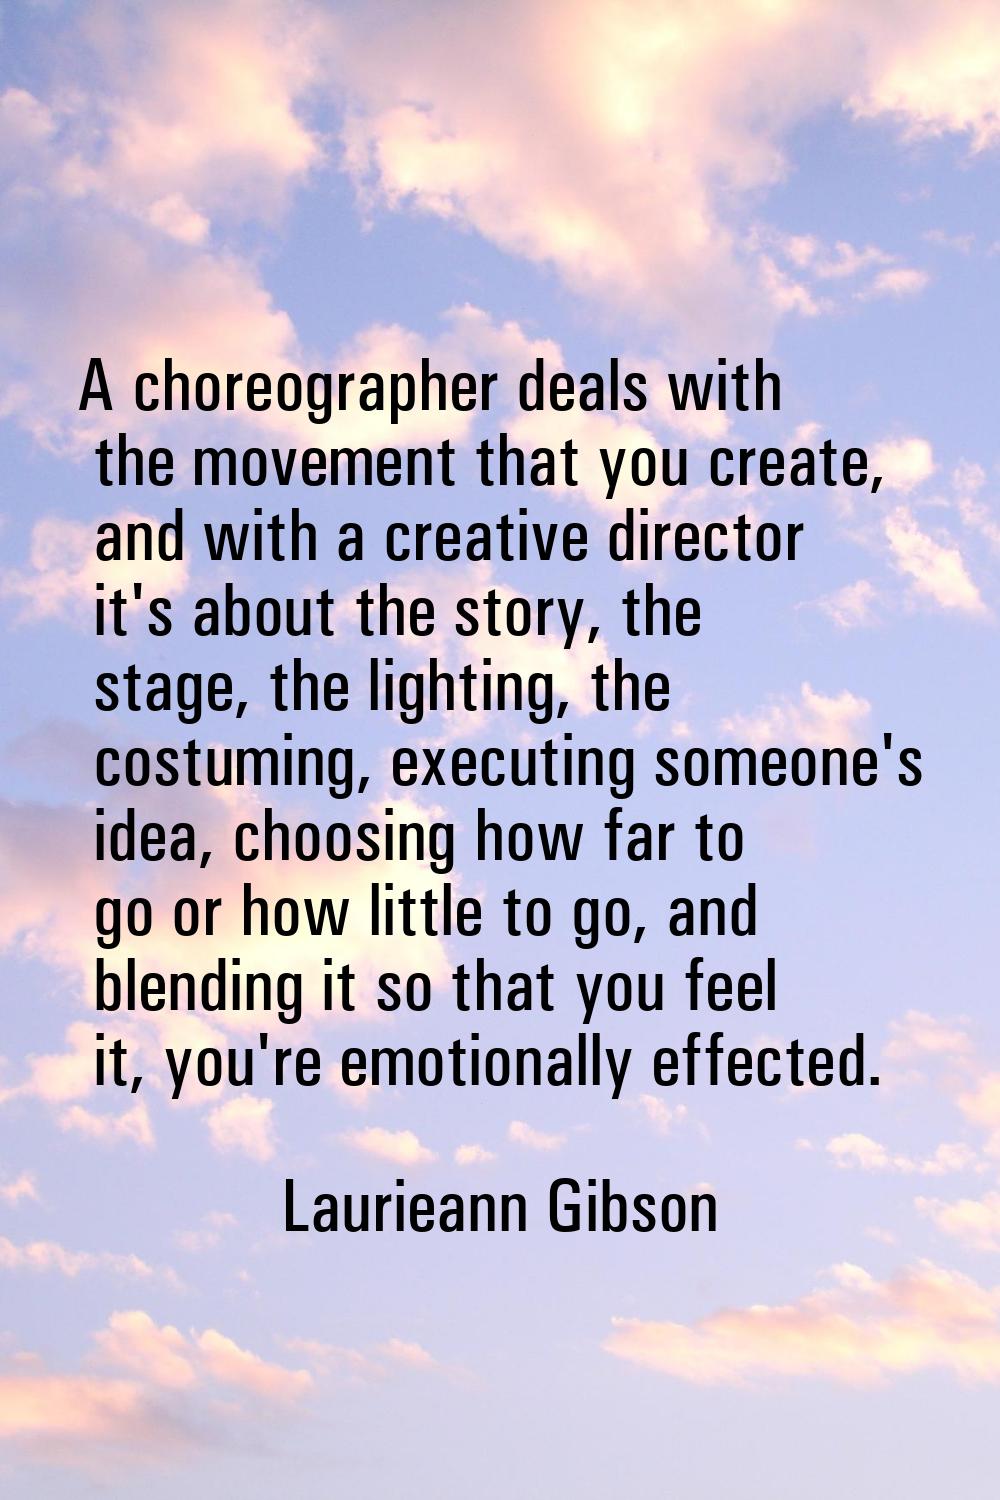 A choreographer deals with the movement that you create, and with a creative director it's about th